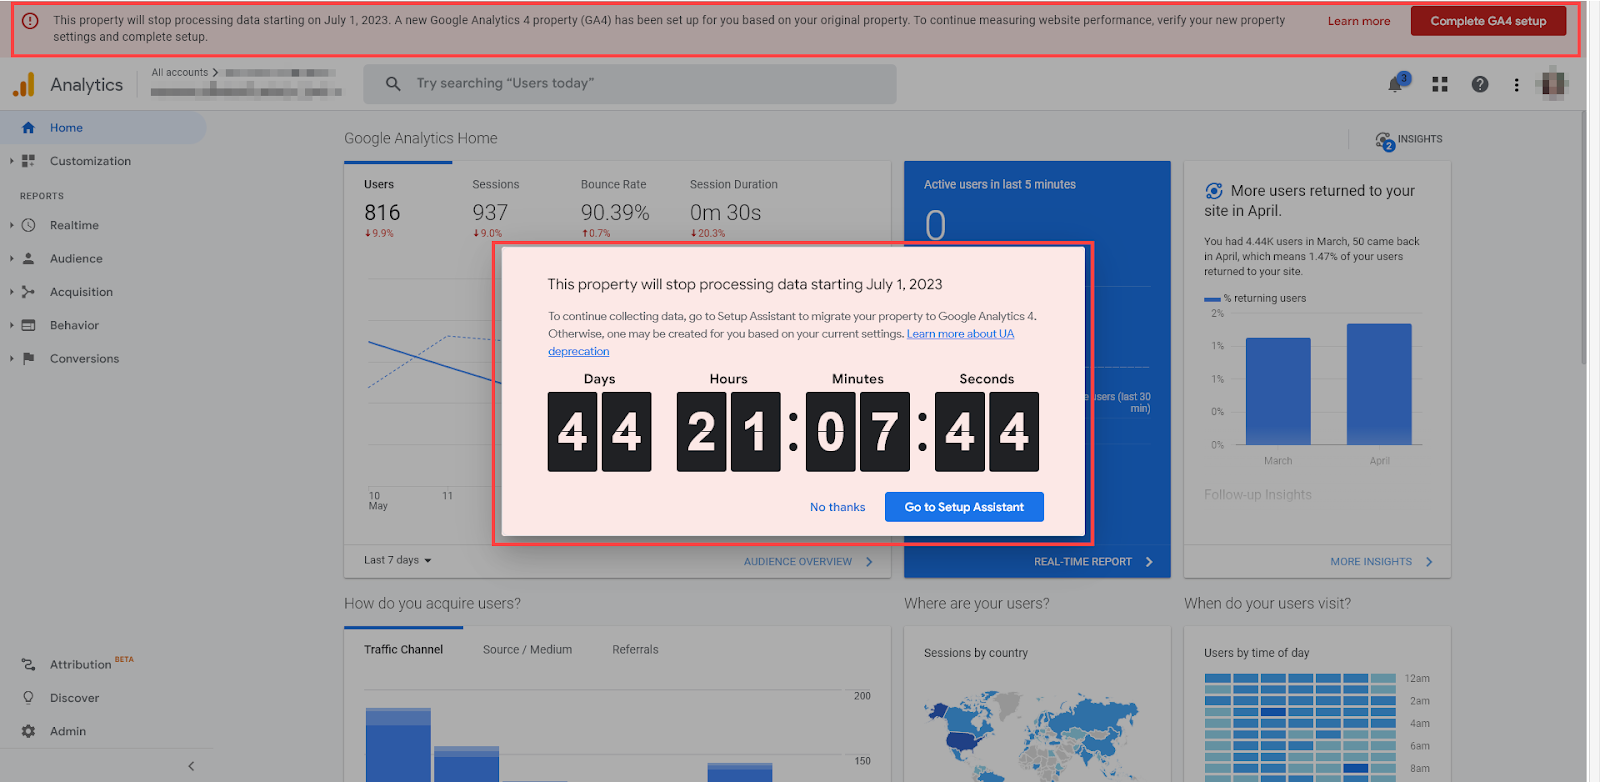 Google Analytics 4 Dashboard Screenshot Showing Countdown Timer Warning That the Property  Needs to Be Migrated to Google Analytics 4